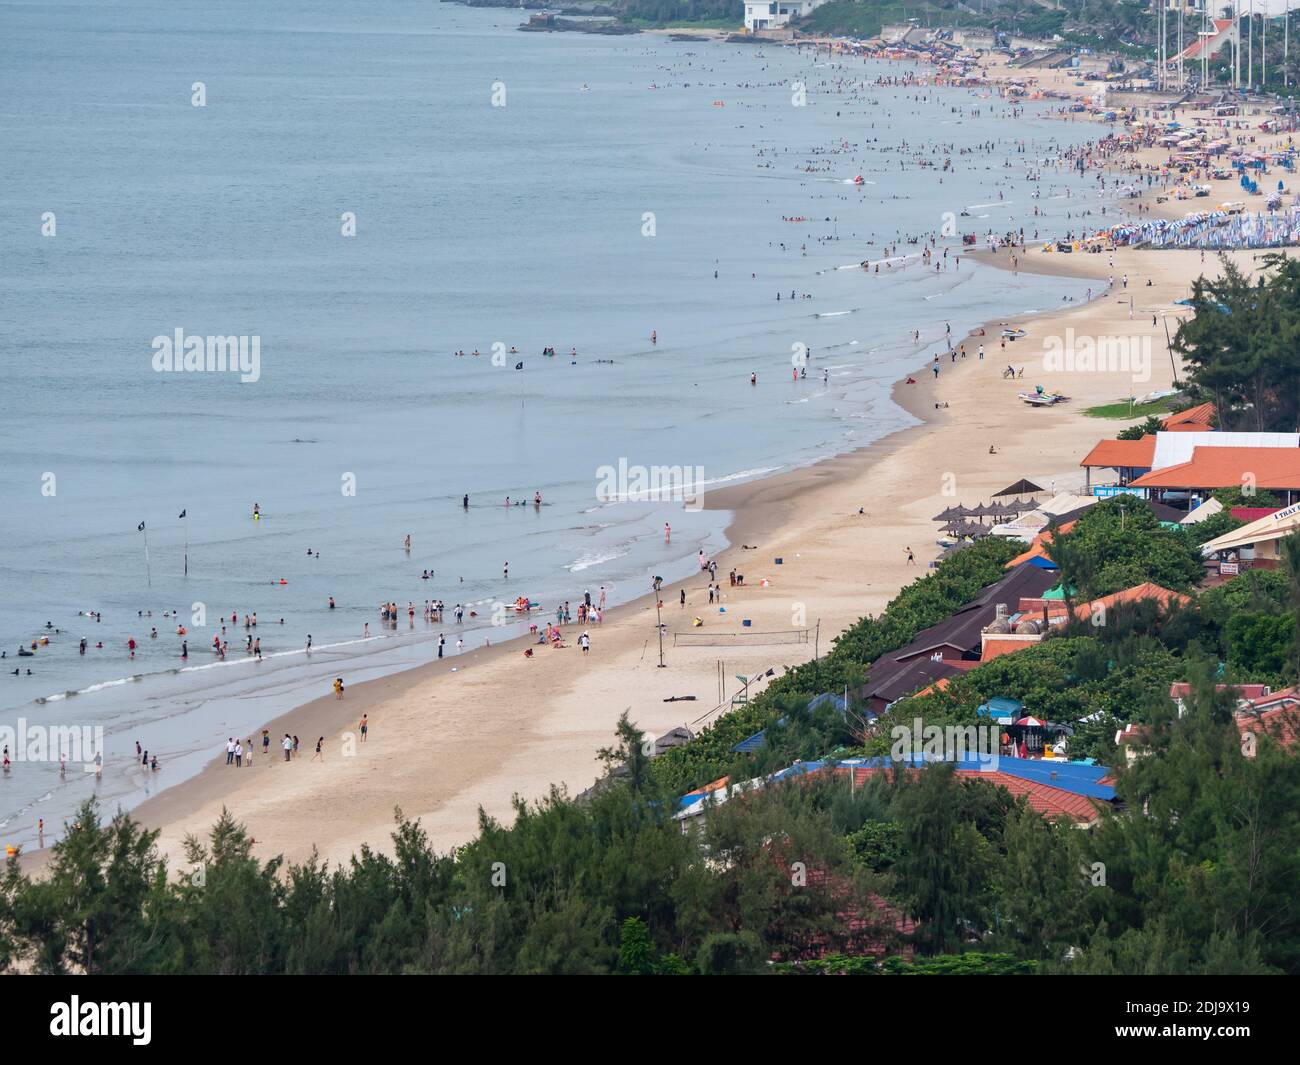 Bai Bien beach in Vung Tau in the Bang Ria-Vung Tau Province of South Vietnam, with restaurants, hotels and tourists. Stock Photo